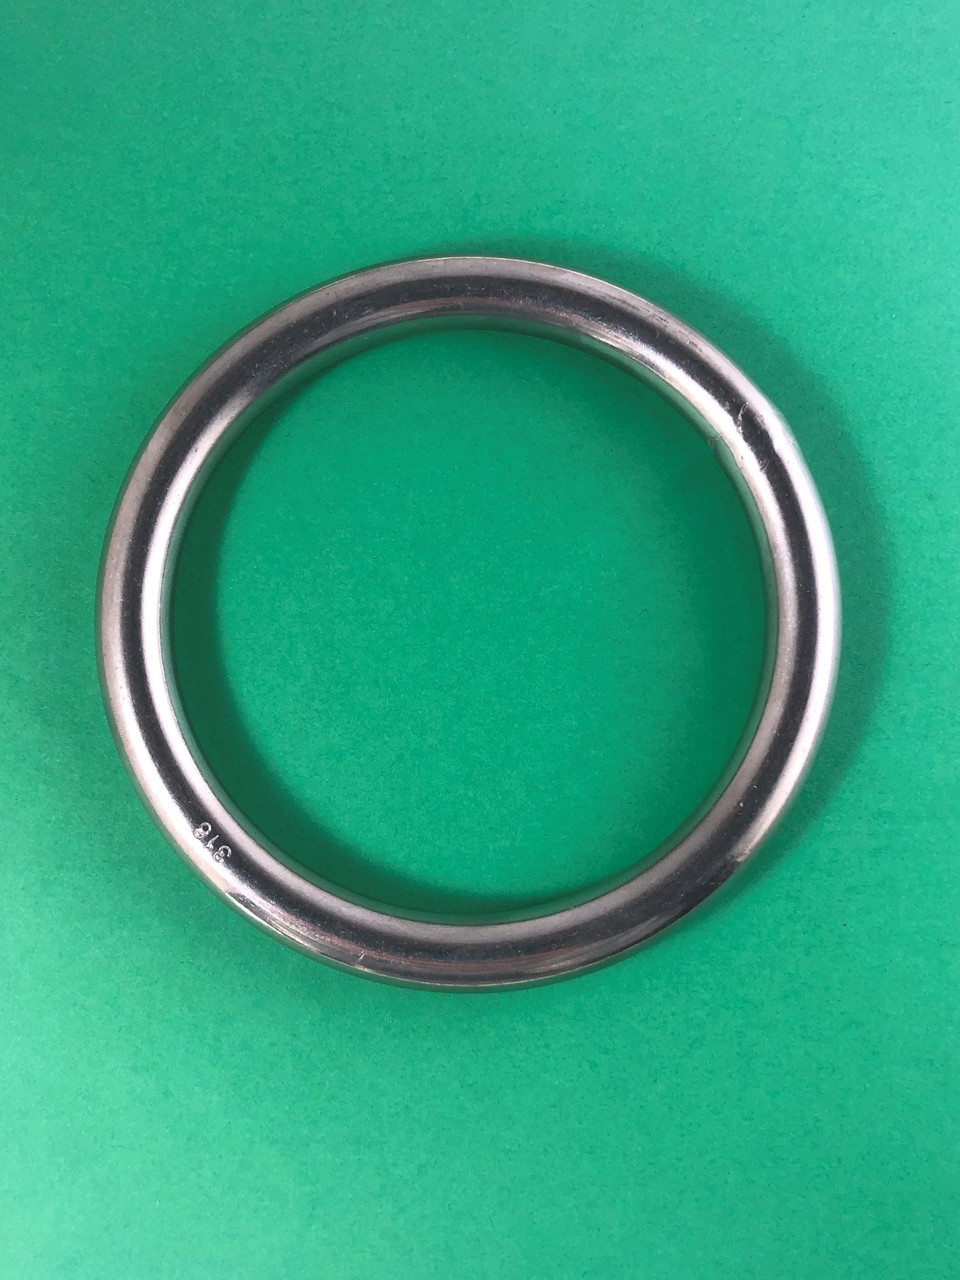 Round Stainless Steel Ring, Material Grade: Ss 304, Size: 3 Inch